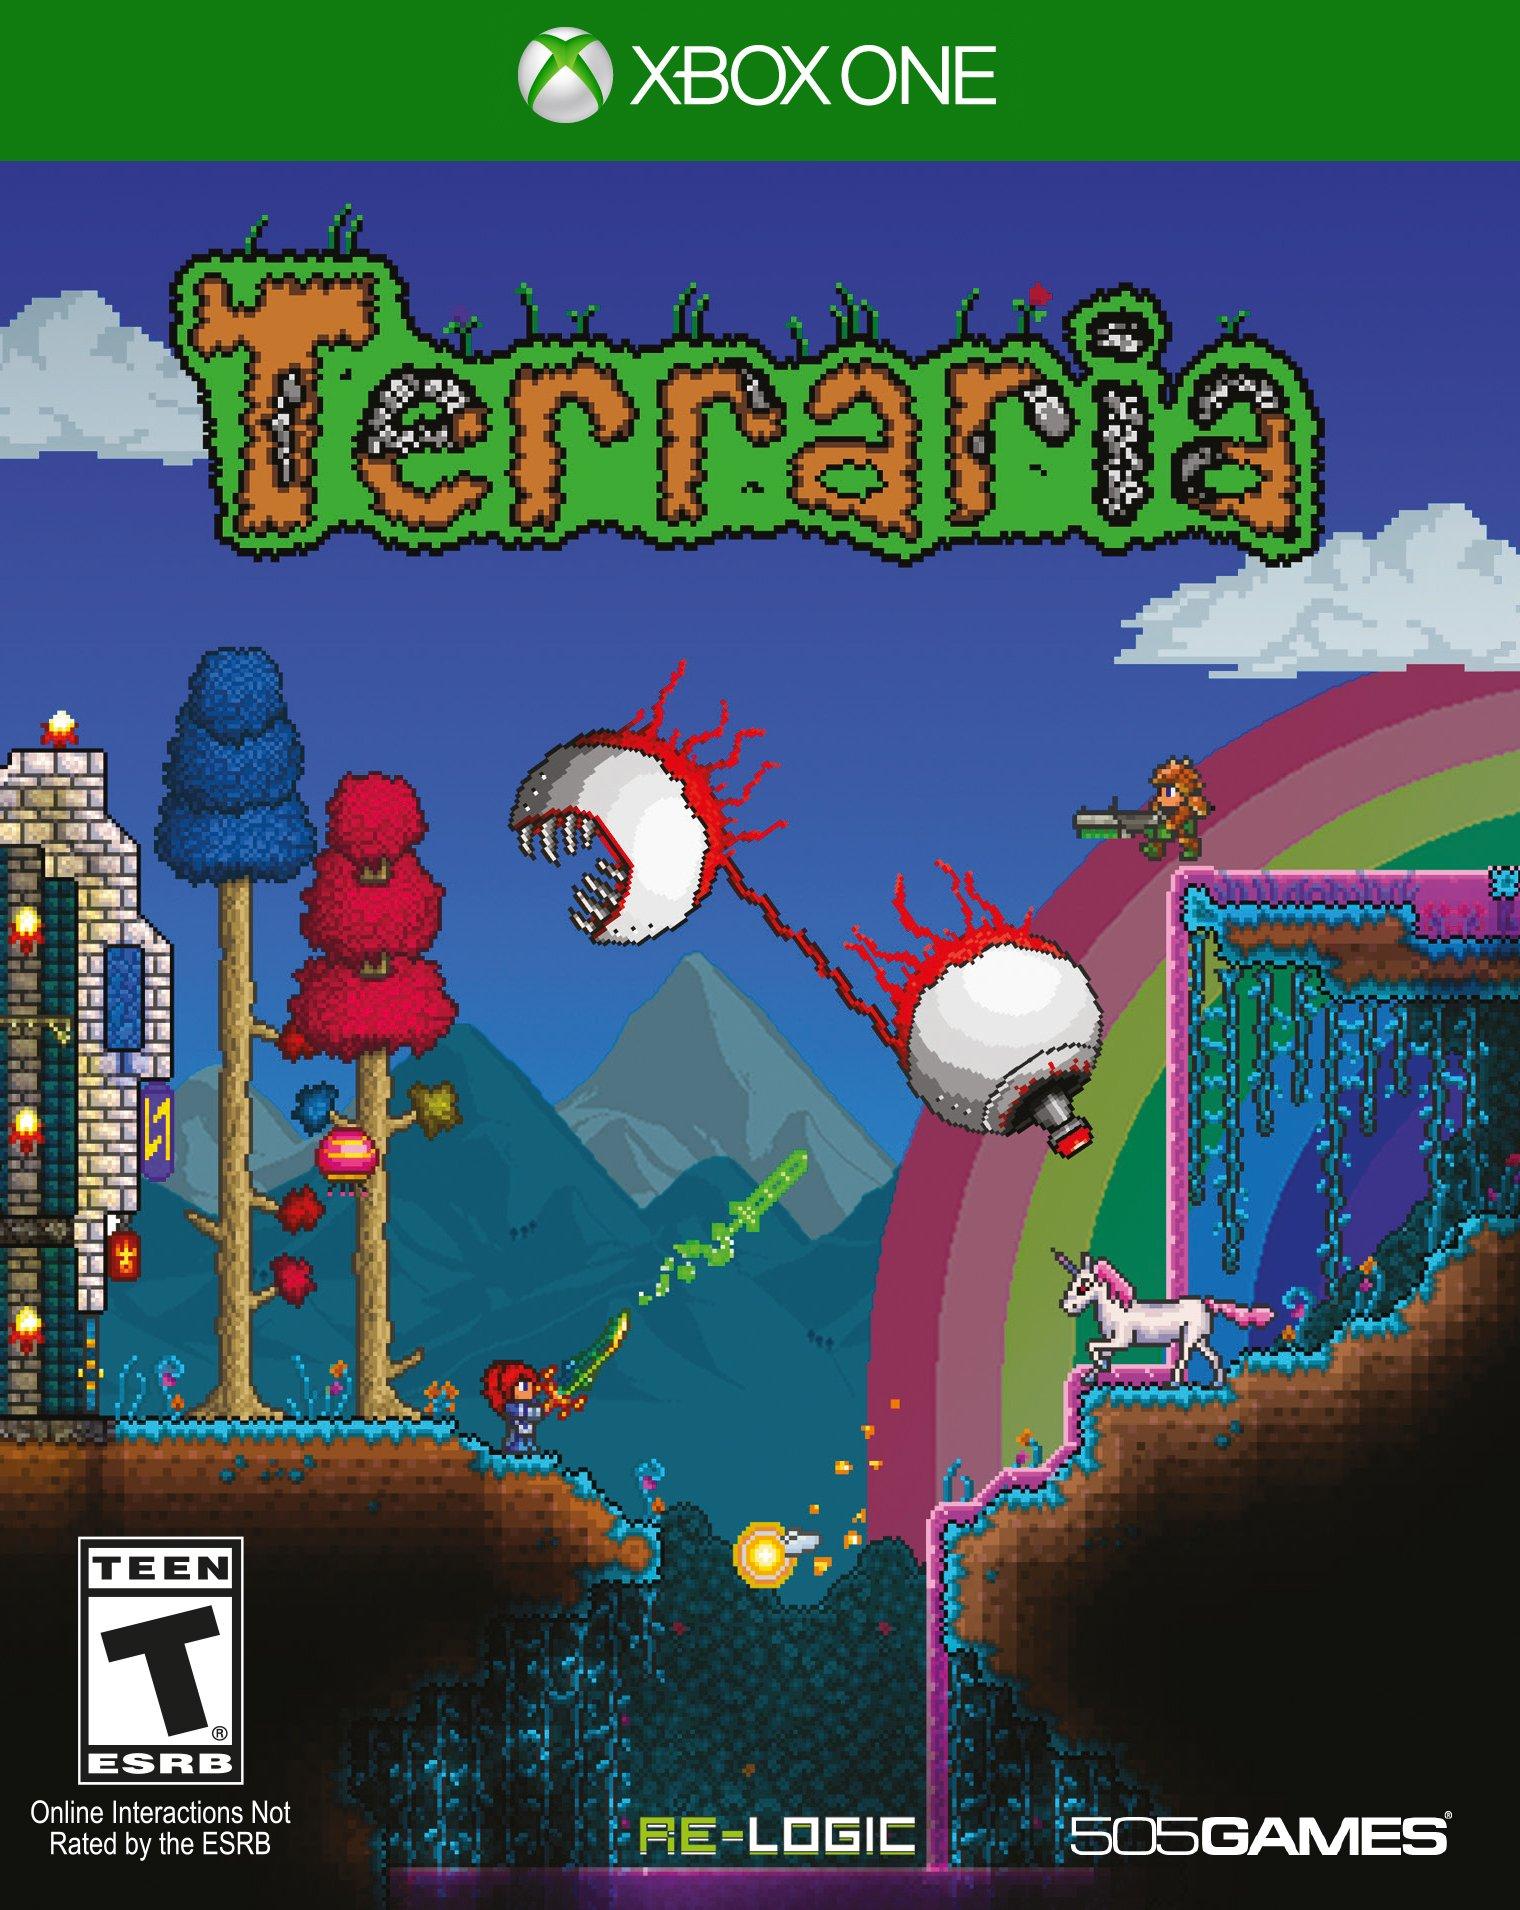 Crossplay may be coming to Terraria soon